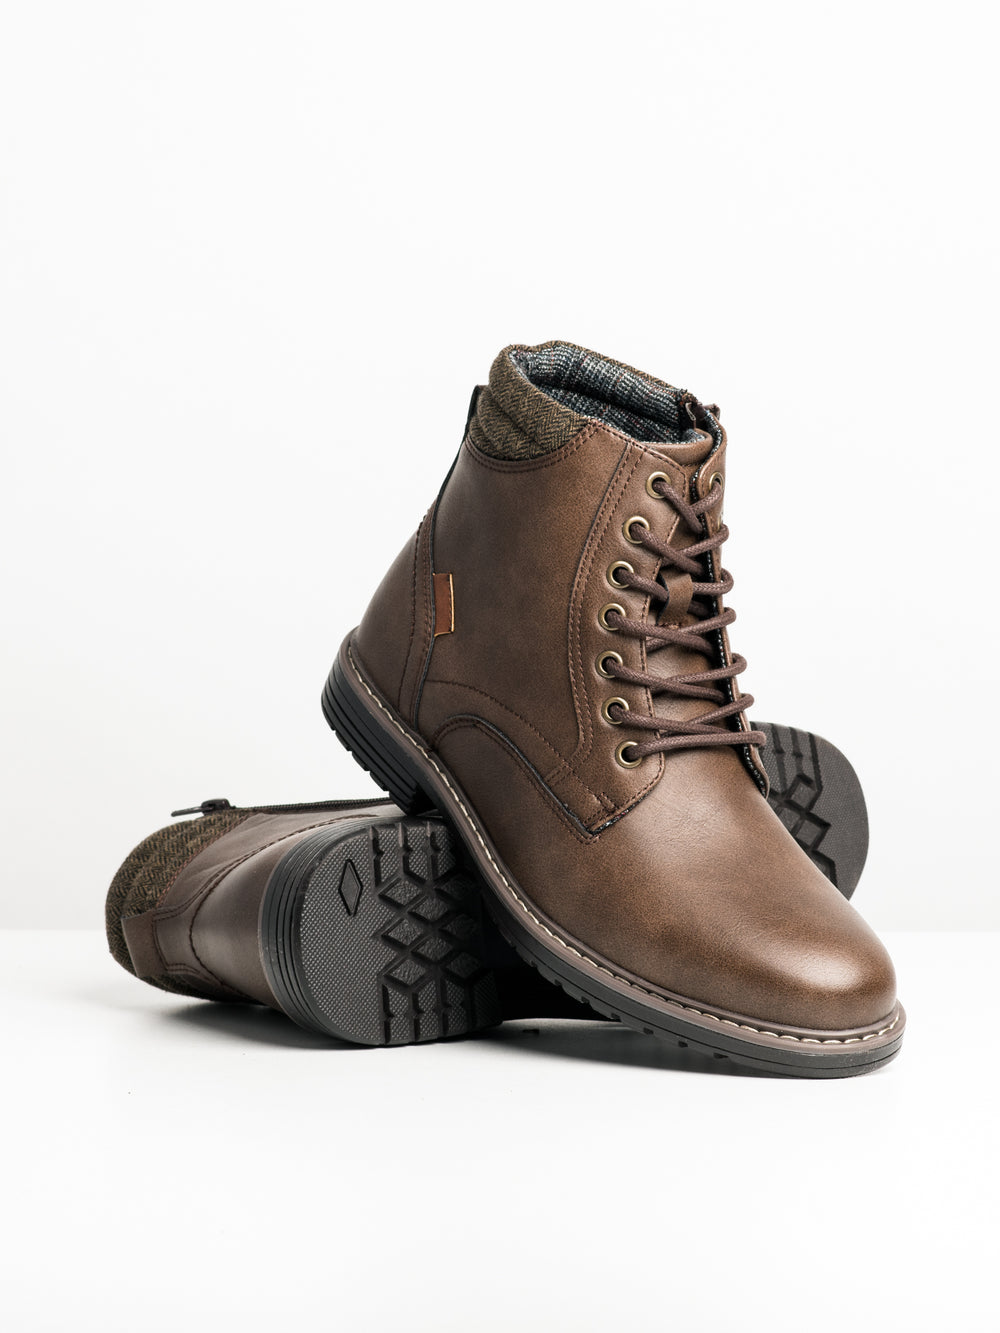 MENS BLACKWELL OLLIE BOOT  - CLEARANCE